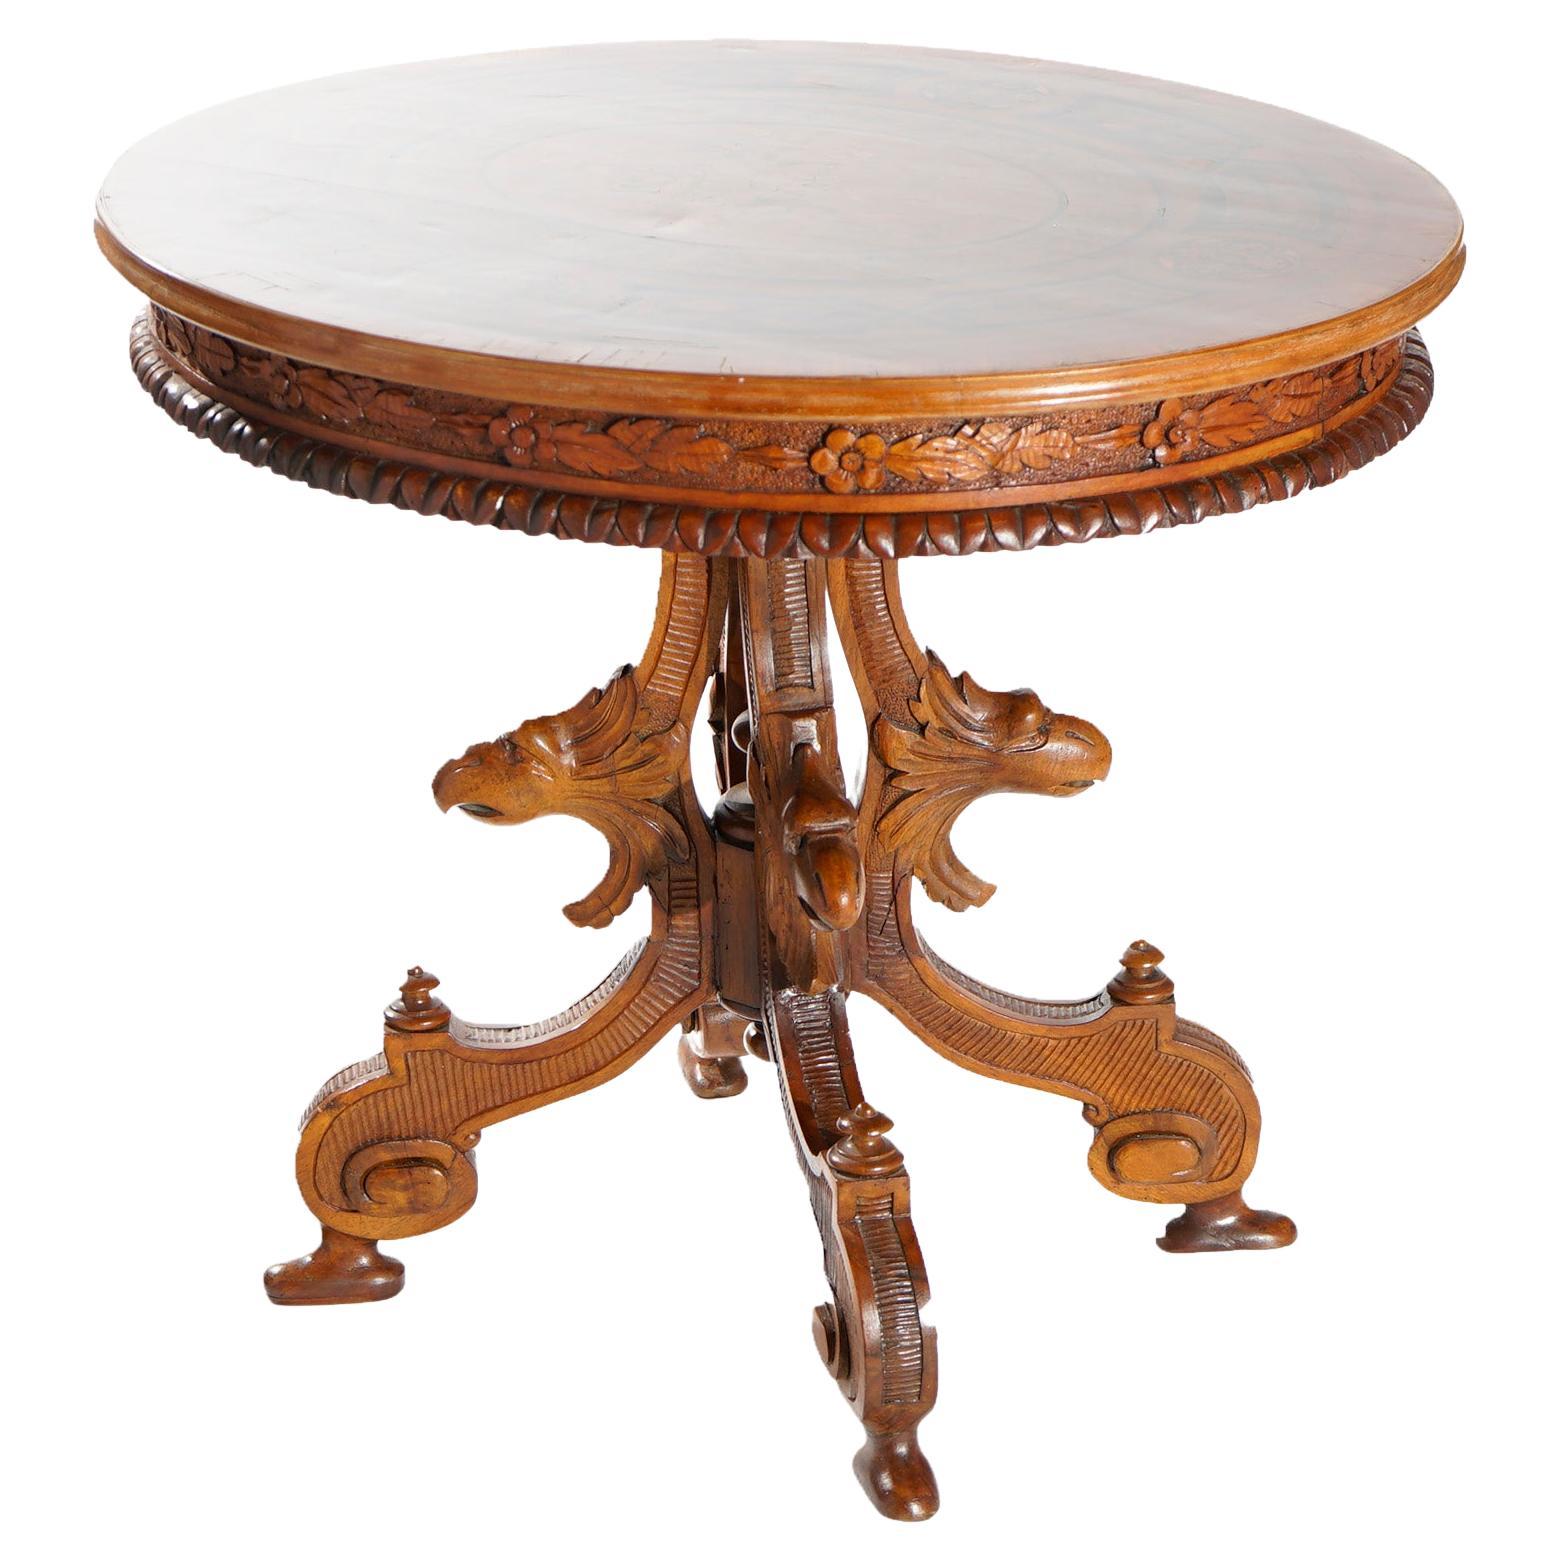 Antique Classical Marquetry Inlaid & Figural Carved Kingwood Center Table 19th C For Sale